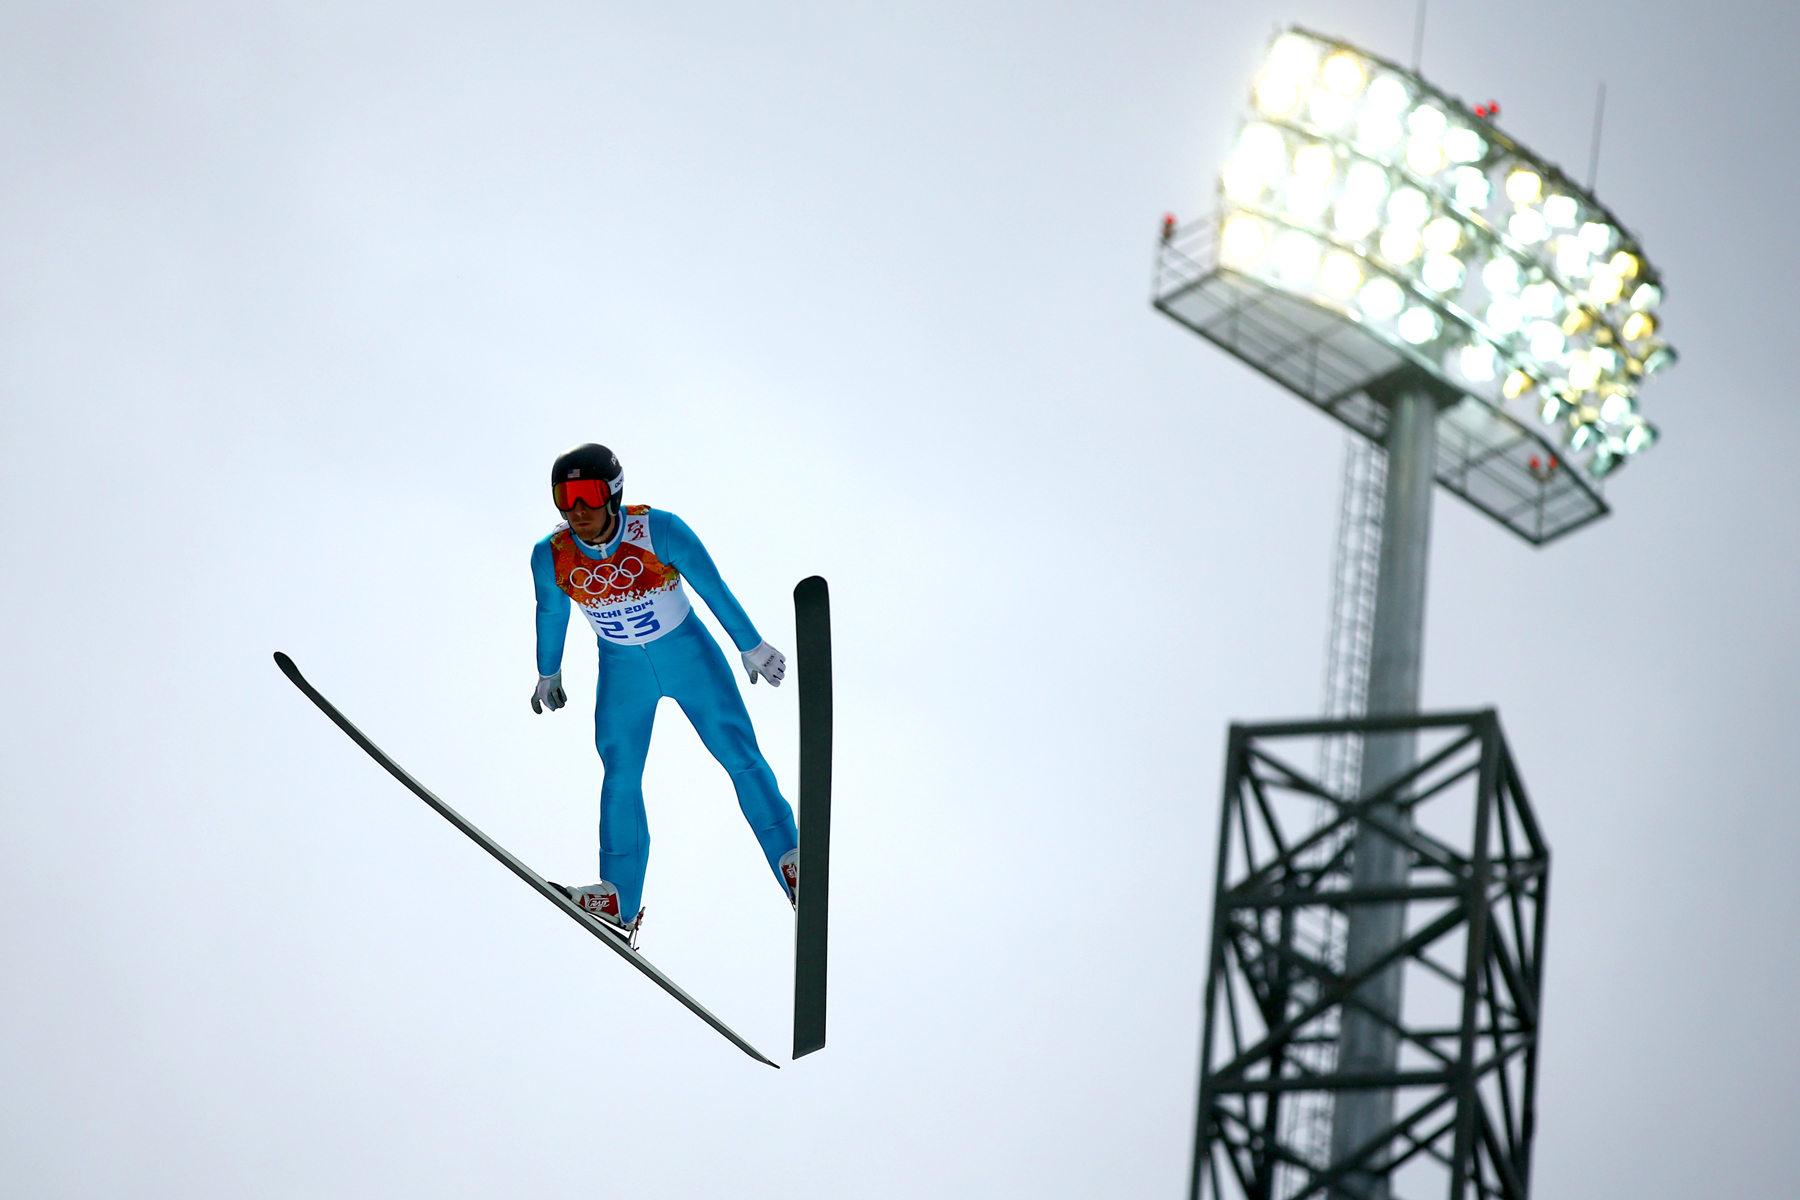 Olympic Winter Games Nordic Combined Criteria